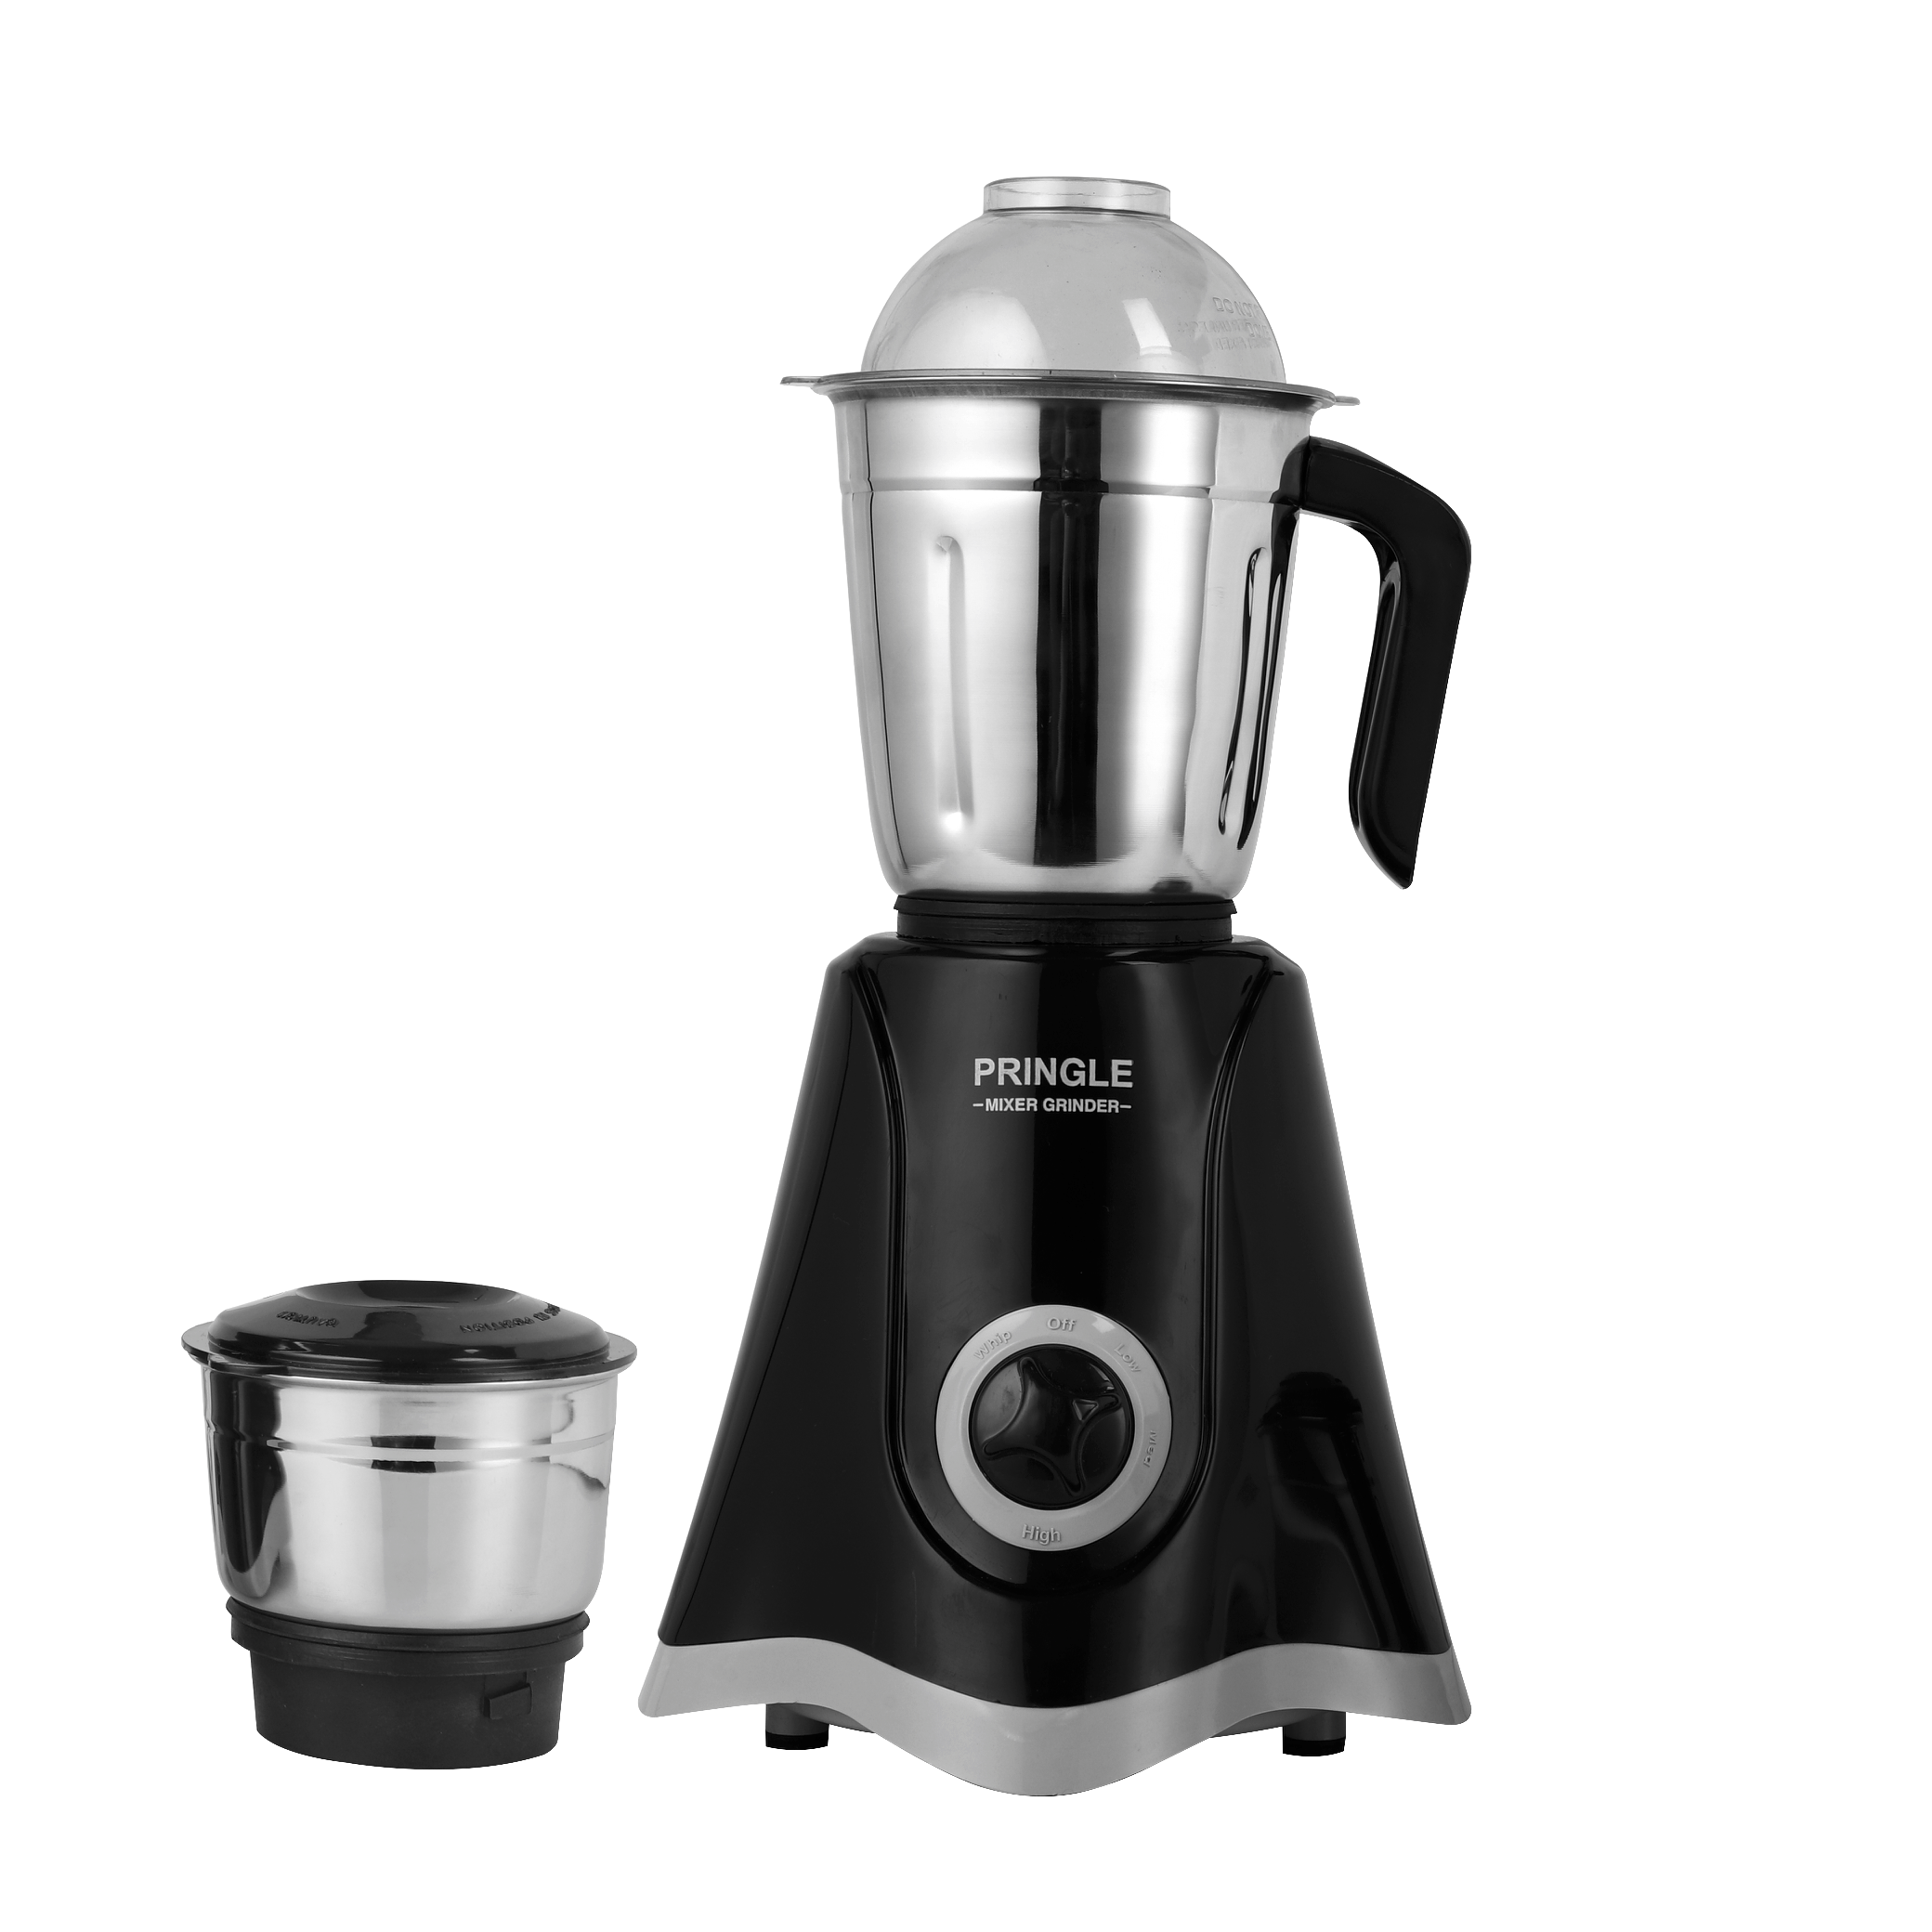 Pringle 2 Jar Mixer Grinder| 500W Powerful Motor | [ISI] Certified | 304 Grade Stainless Steel Blade| 2 Stainless Steel Jars Liquidizing Jar (1 Litres) Chutney Jar (0.4 Litres)3 Speed Options with Whip (1 Year Warranty) - Pringle Appliances